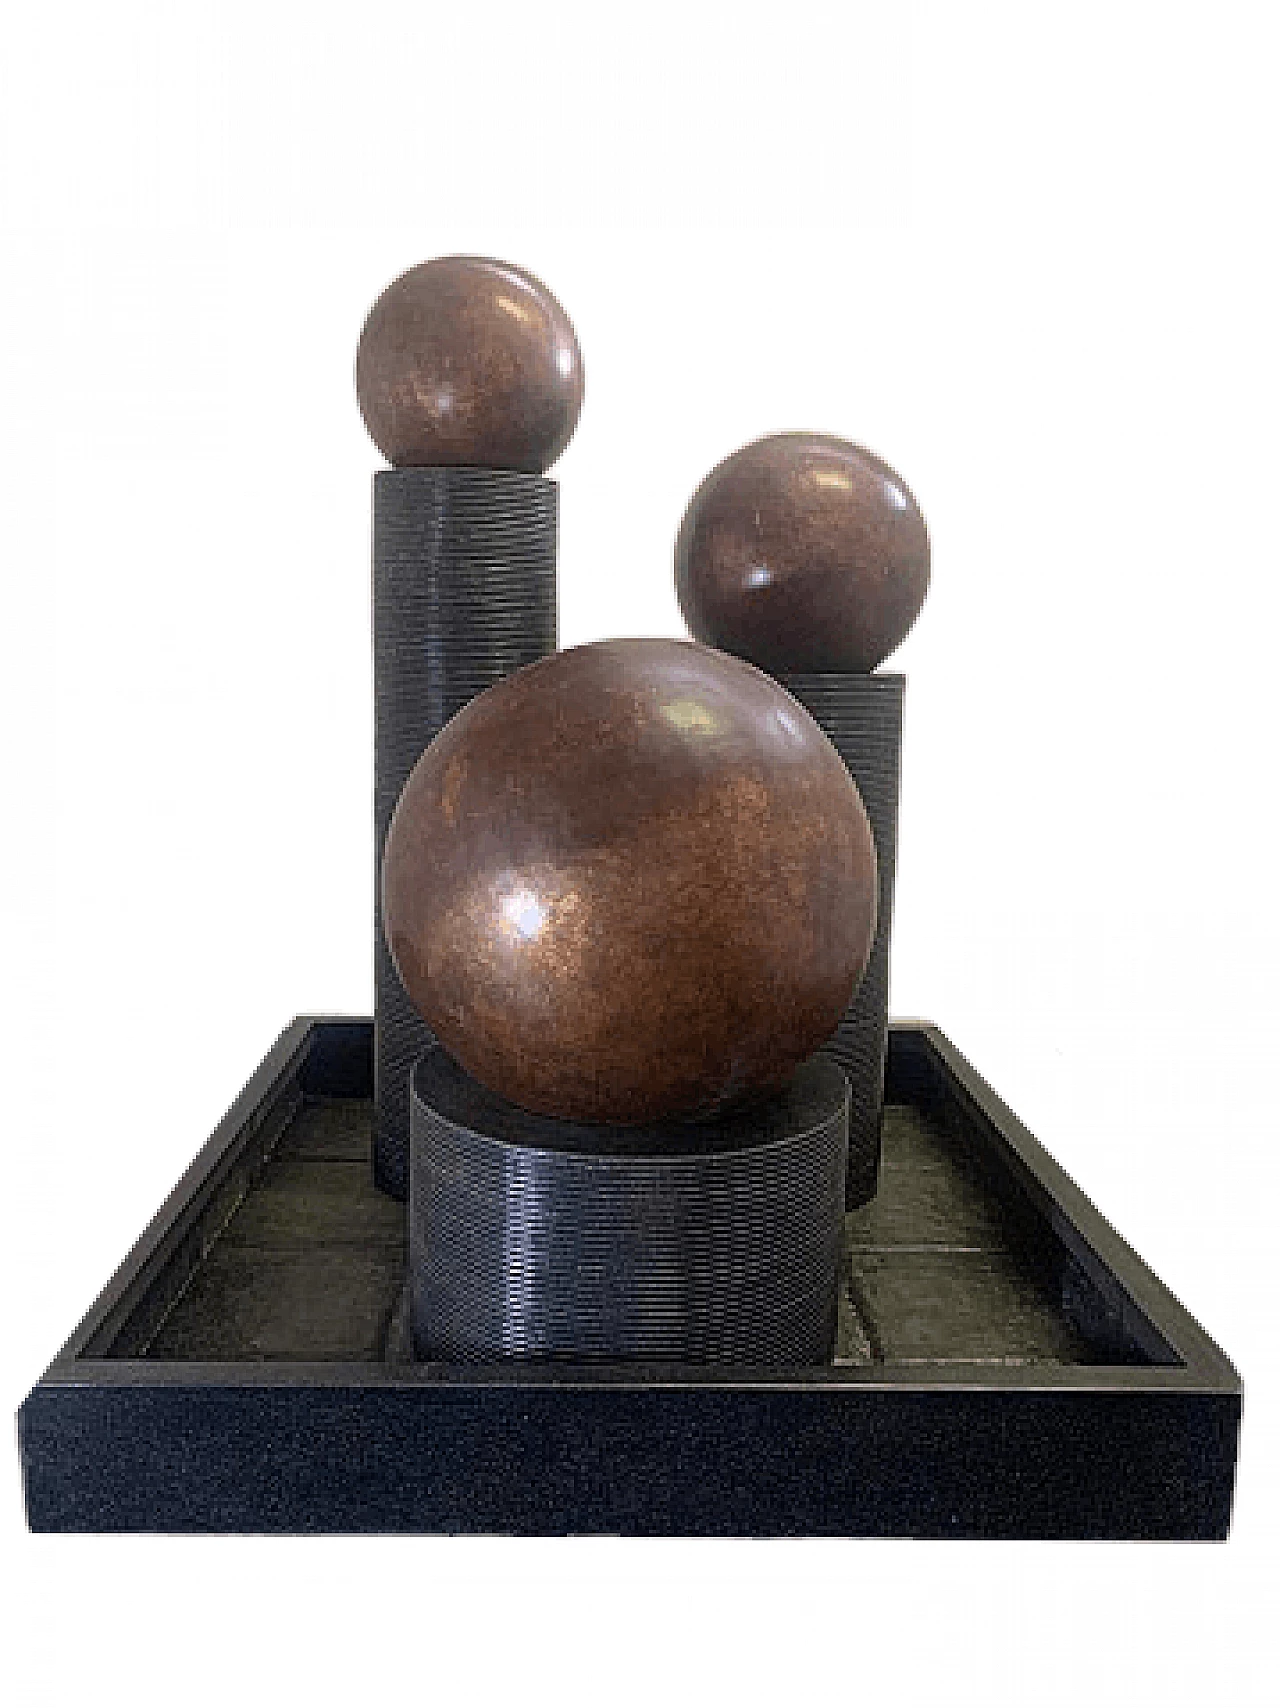 Fibreglass fountain with rotating copper spheres by Ravi Shing, 1990 21